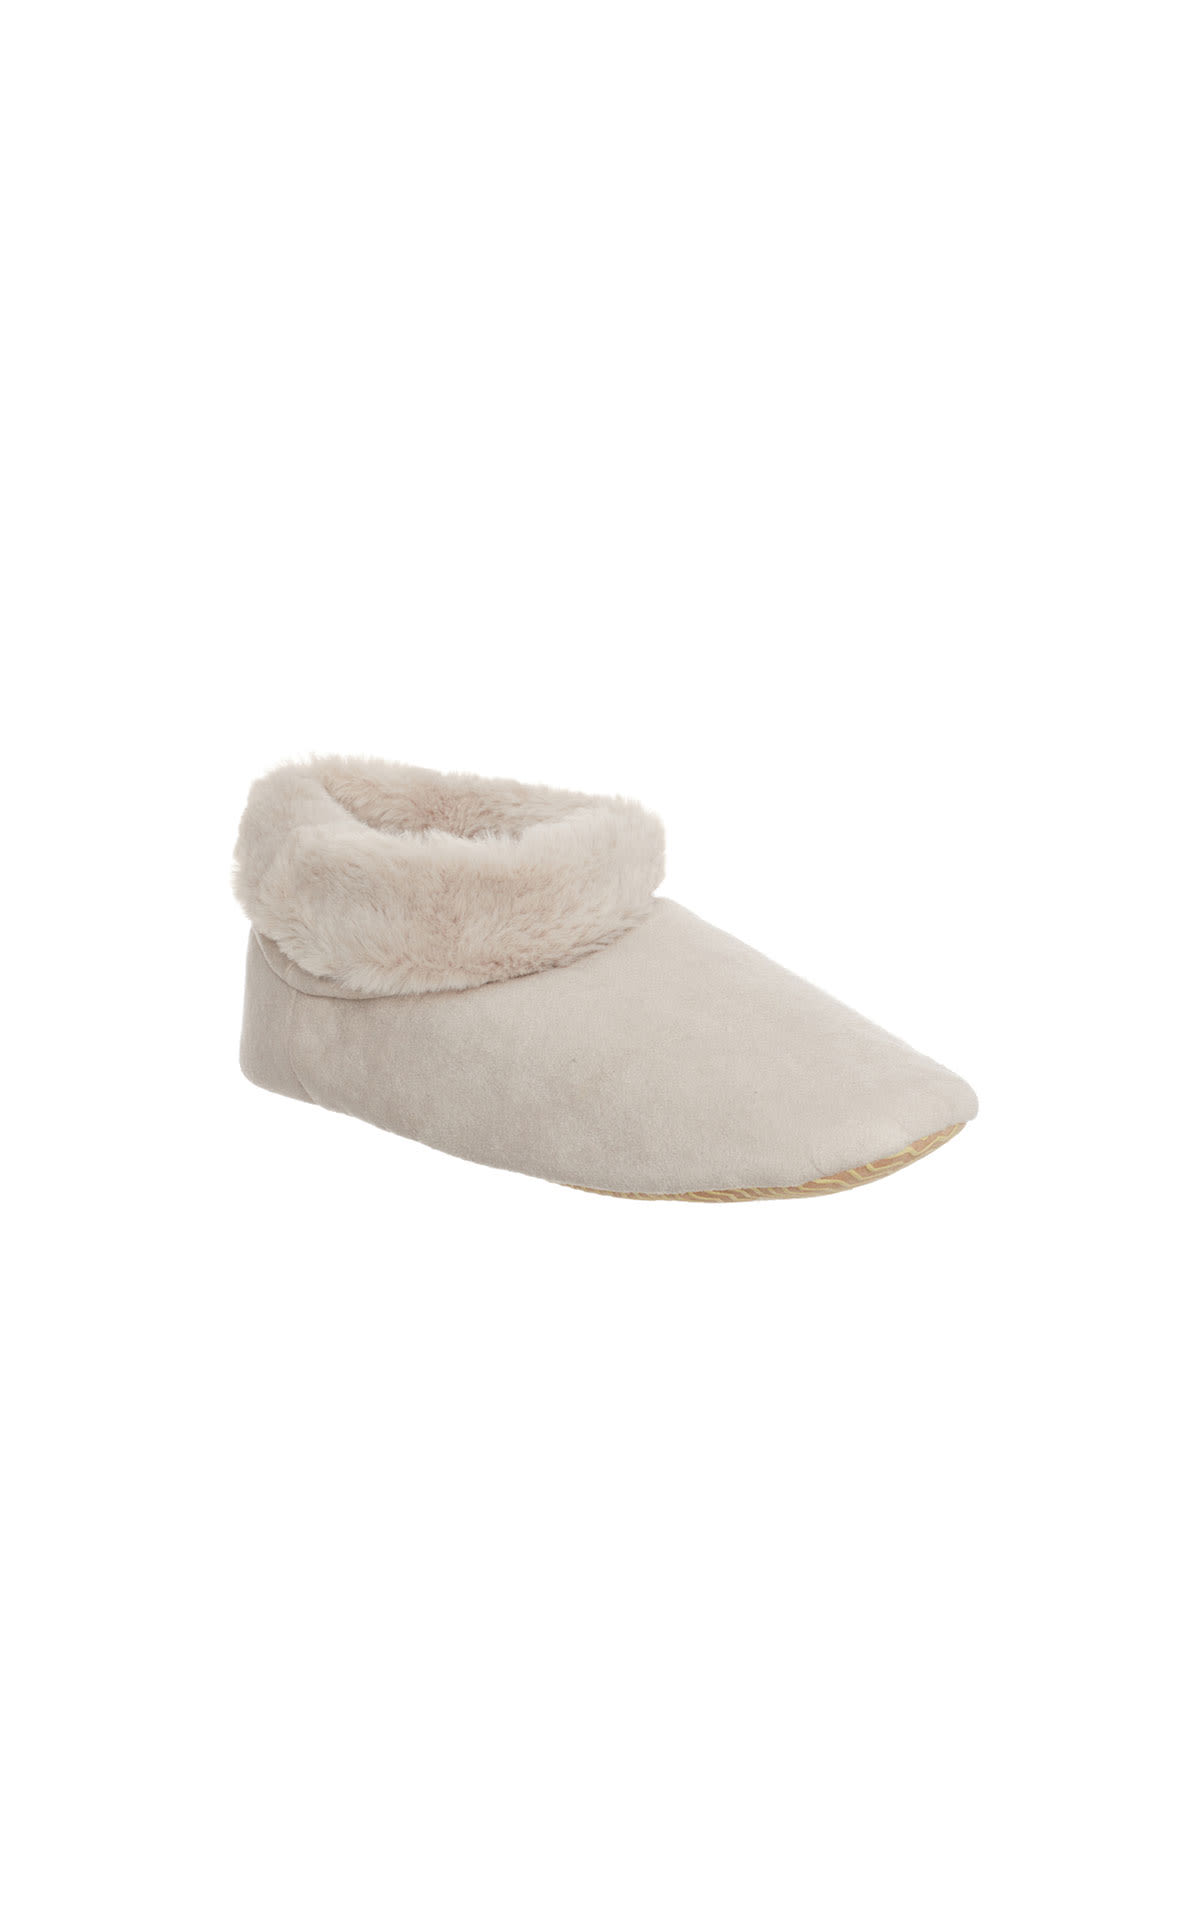 The White Company Cosy boot slipper from Bicester Village